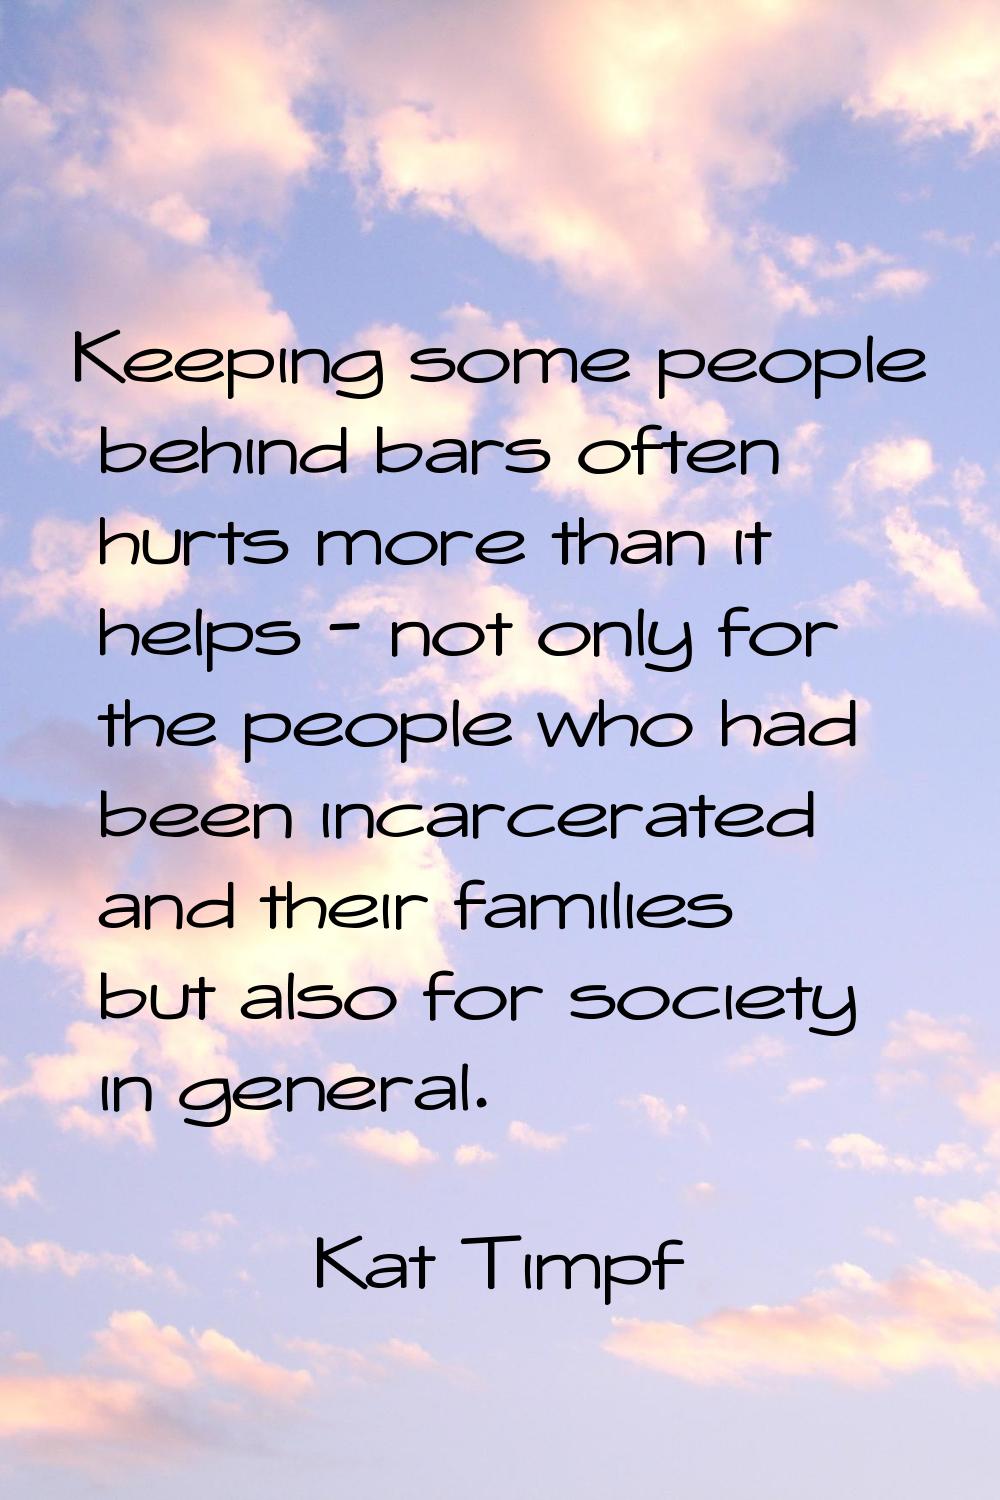 Keeping some people behind bars often hurts more than it helps - not only for the people who had be